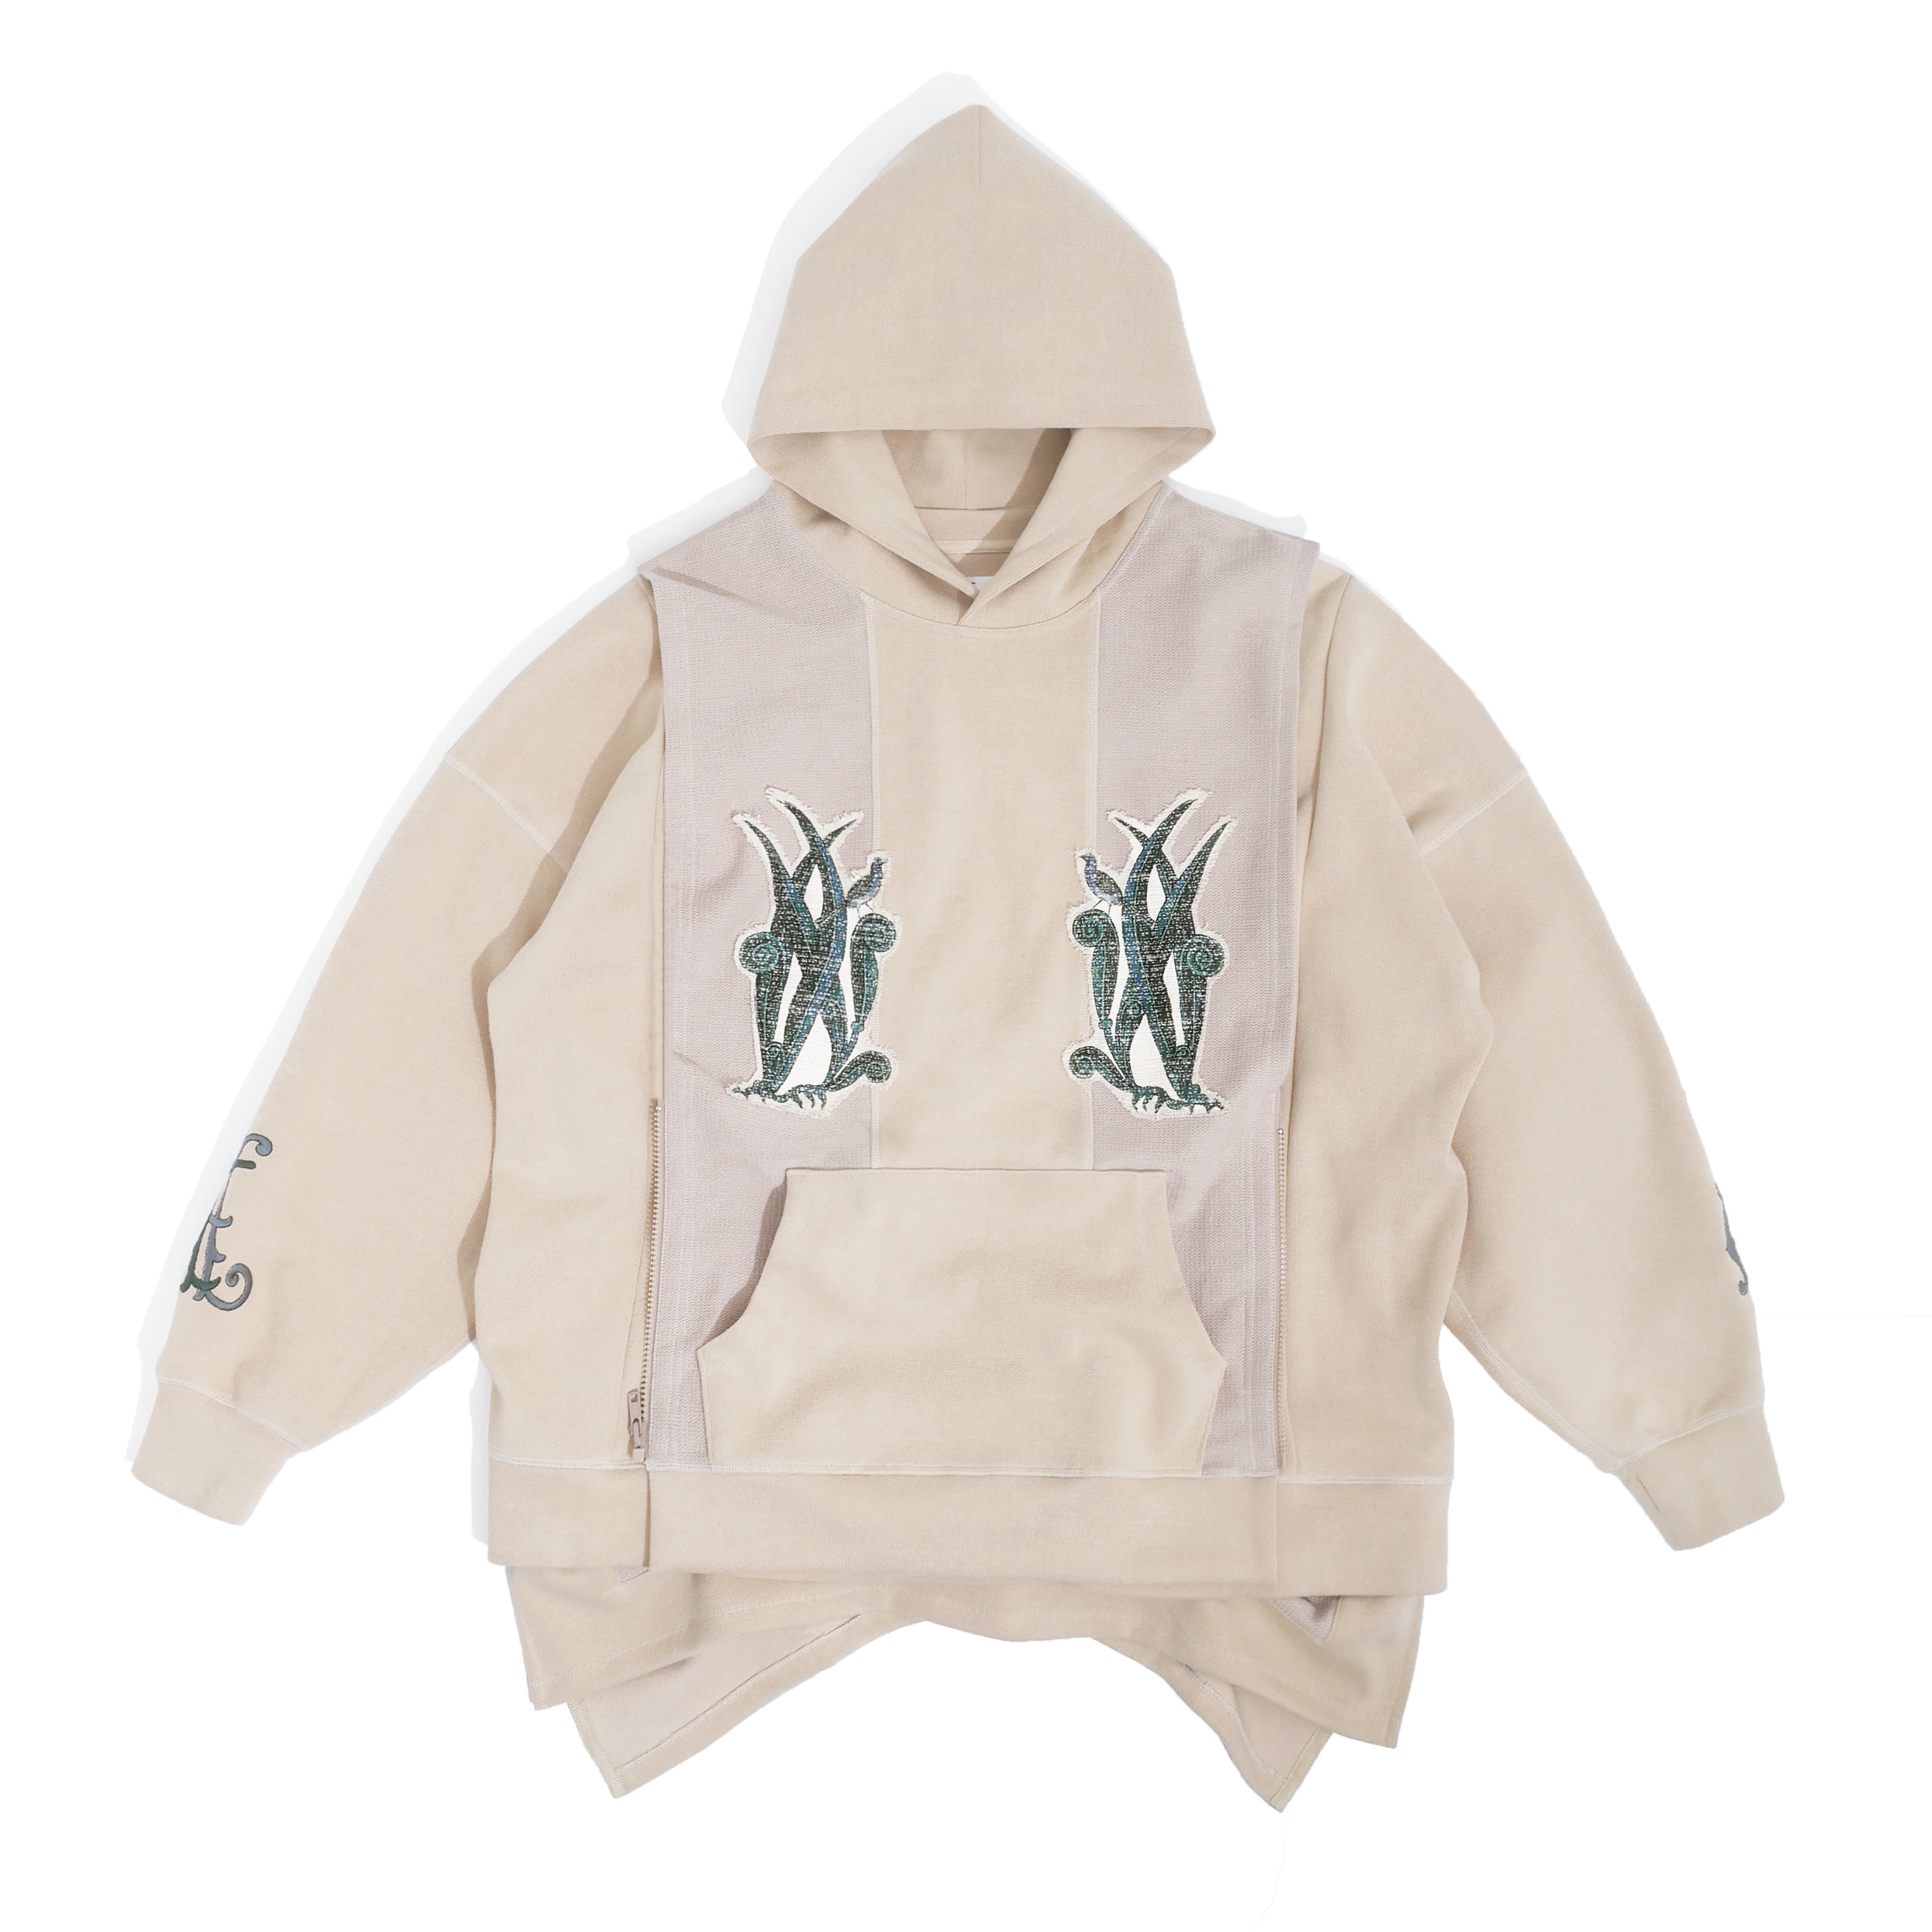 No:ACRS22-T01 | Name:MANDRAGORA HOODIE	 | Color:Khaki | Size:Free【(A)CRYPSIS®】【SEIVSON_セイヴソン】